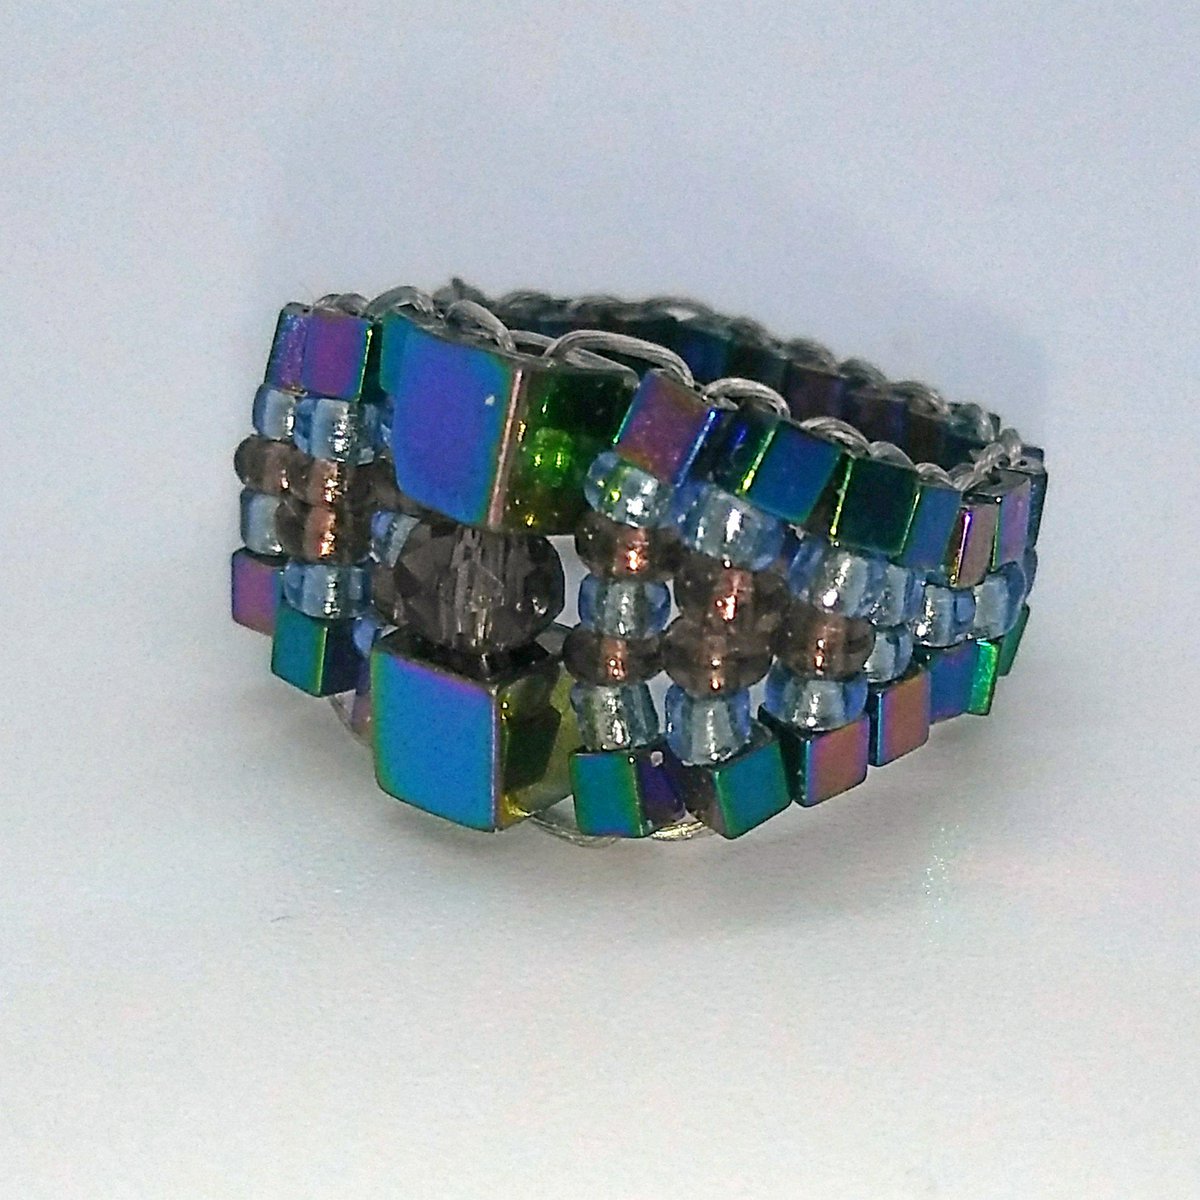 Excited to share the latest addition to my #etsy shop: Colorful Metallic Square Beaded Ring for her Size 6 etsy.me/3hZsBCQ #rainbow #women #metalicbeads #purple #blue #squarebeads #forher #designsbyalondra